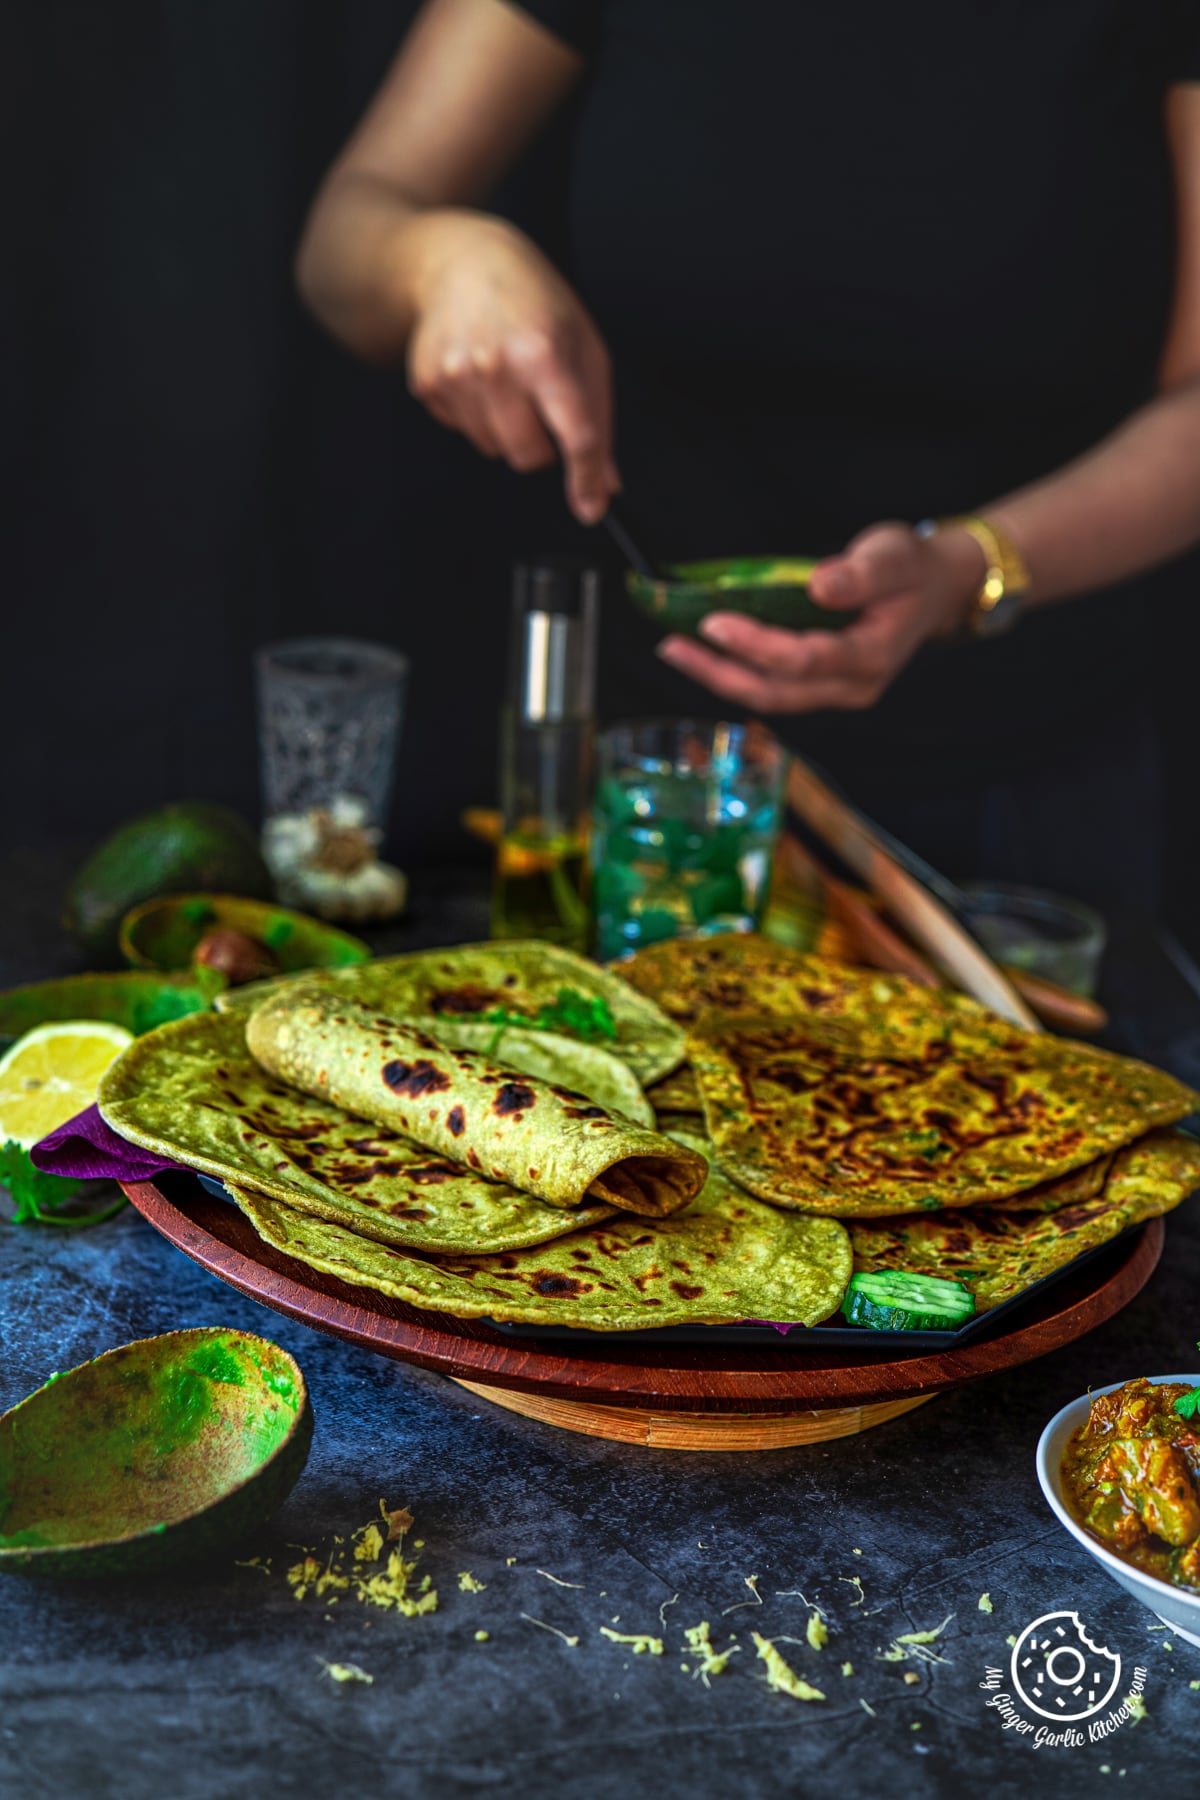 avocado parathas and avocado rotis in a wooden plate and a female scooping avocado pulp in the background